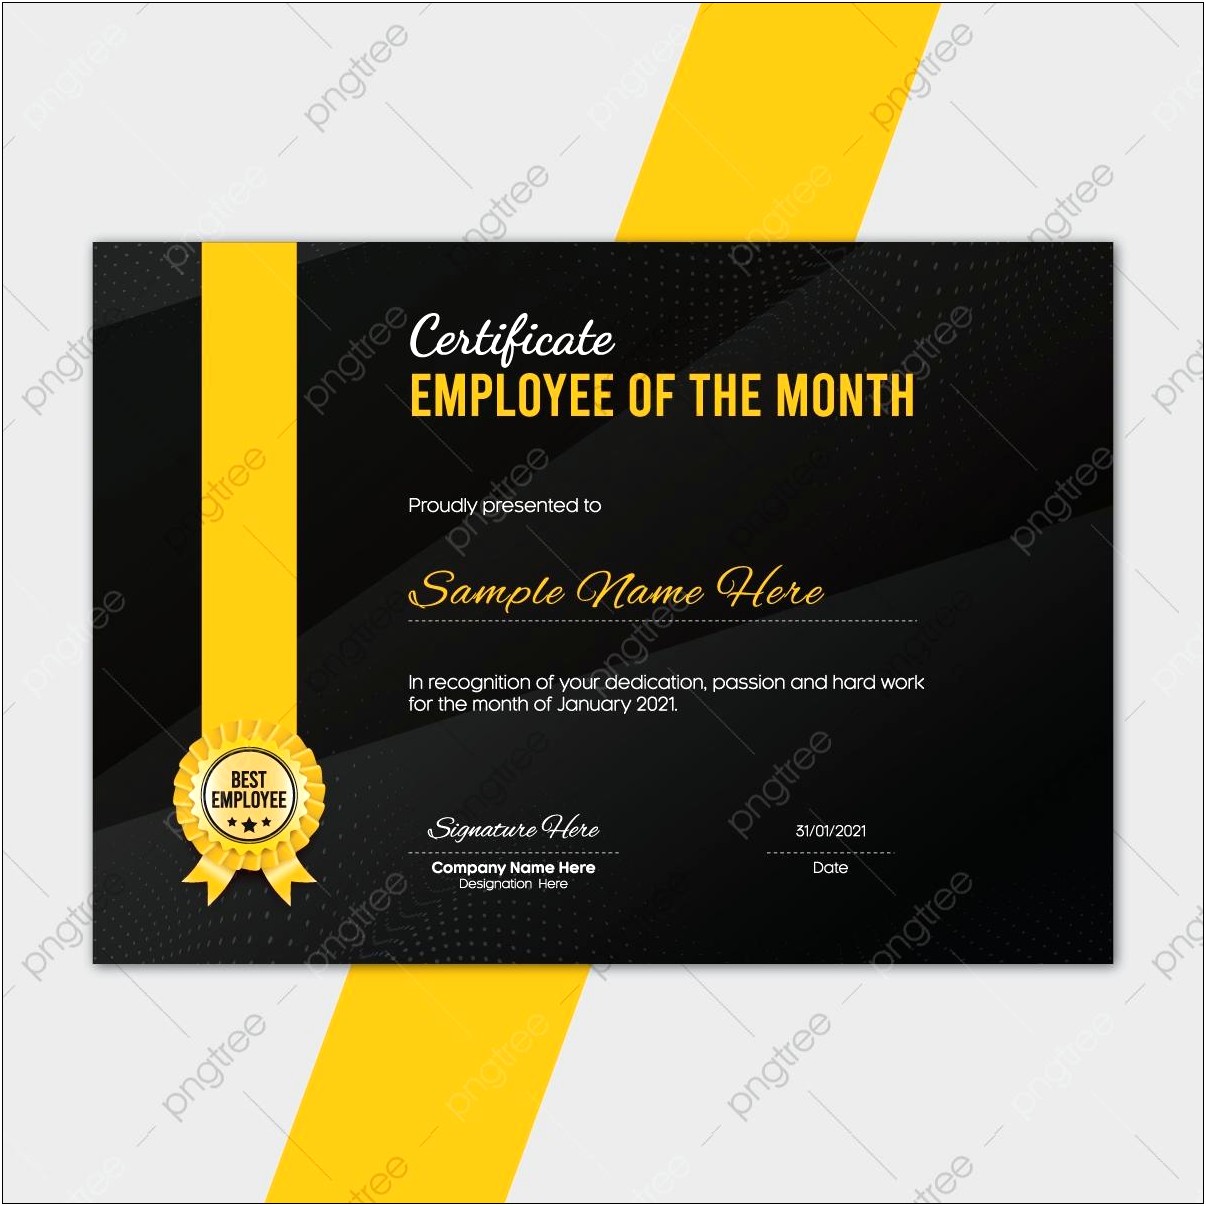 Employee Of The Month Free Certificate Template